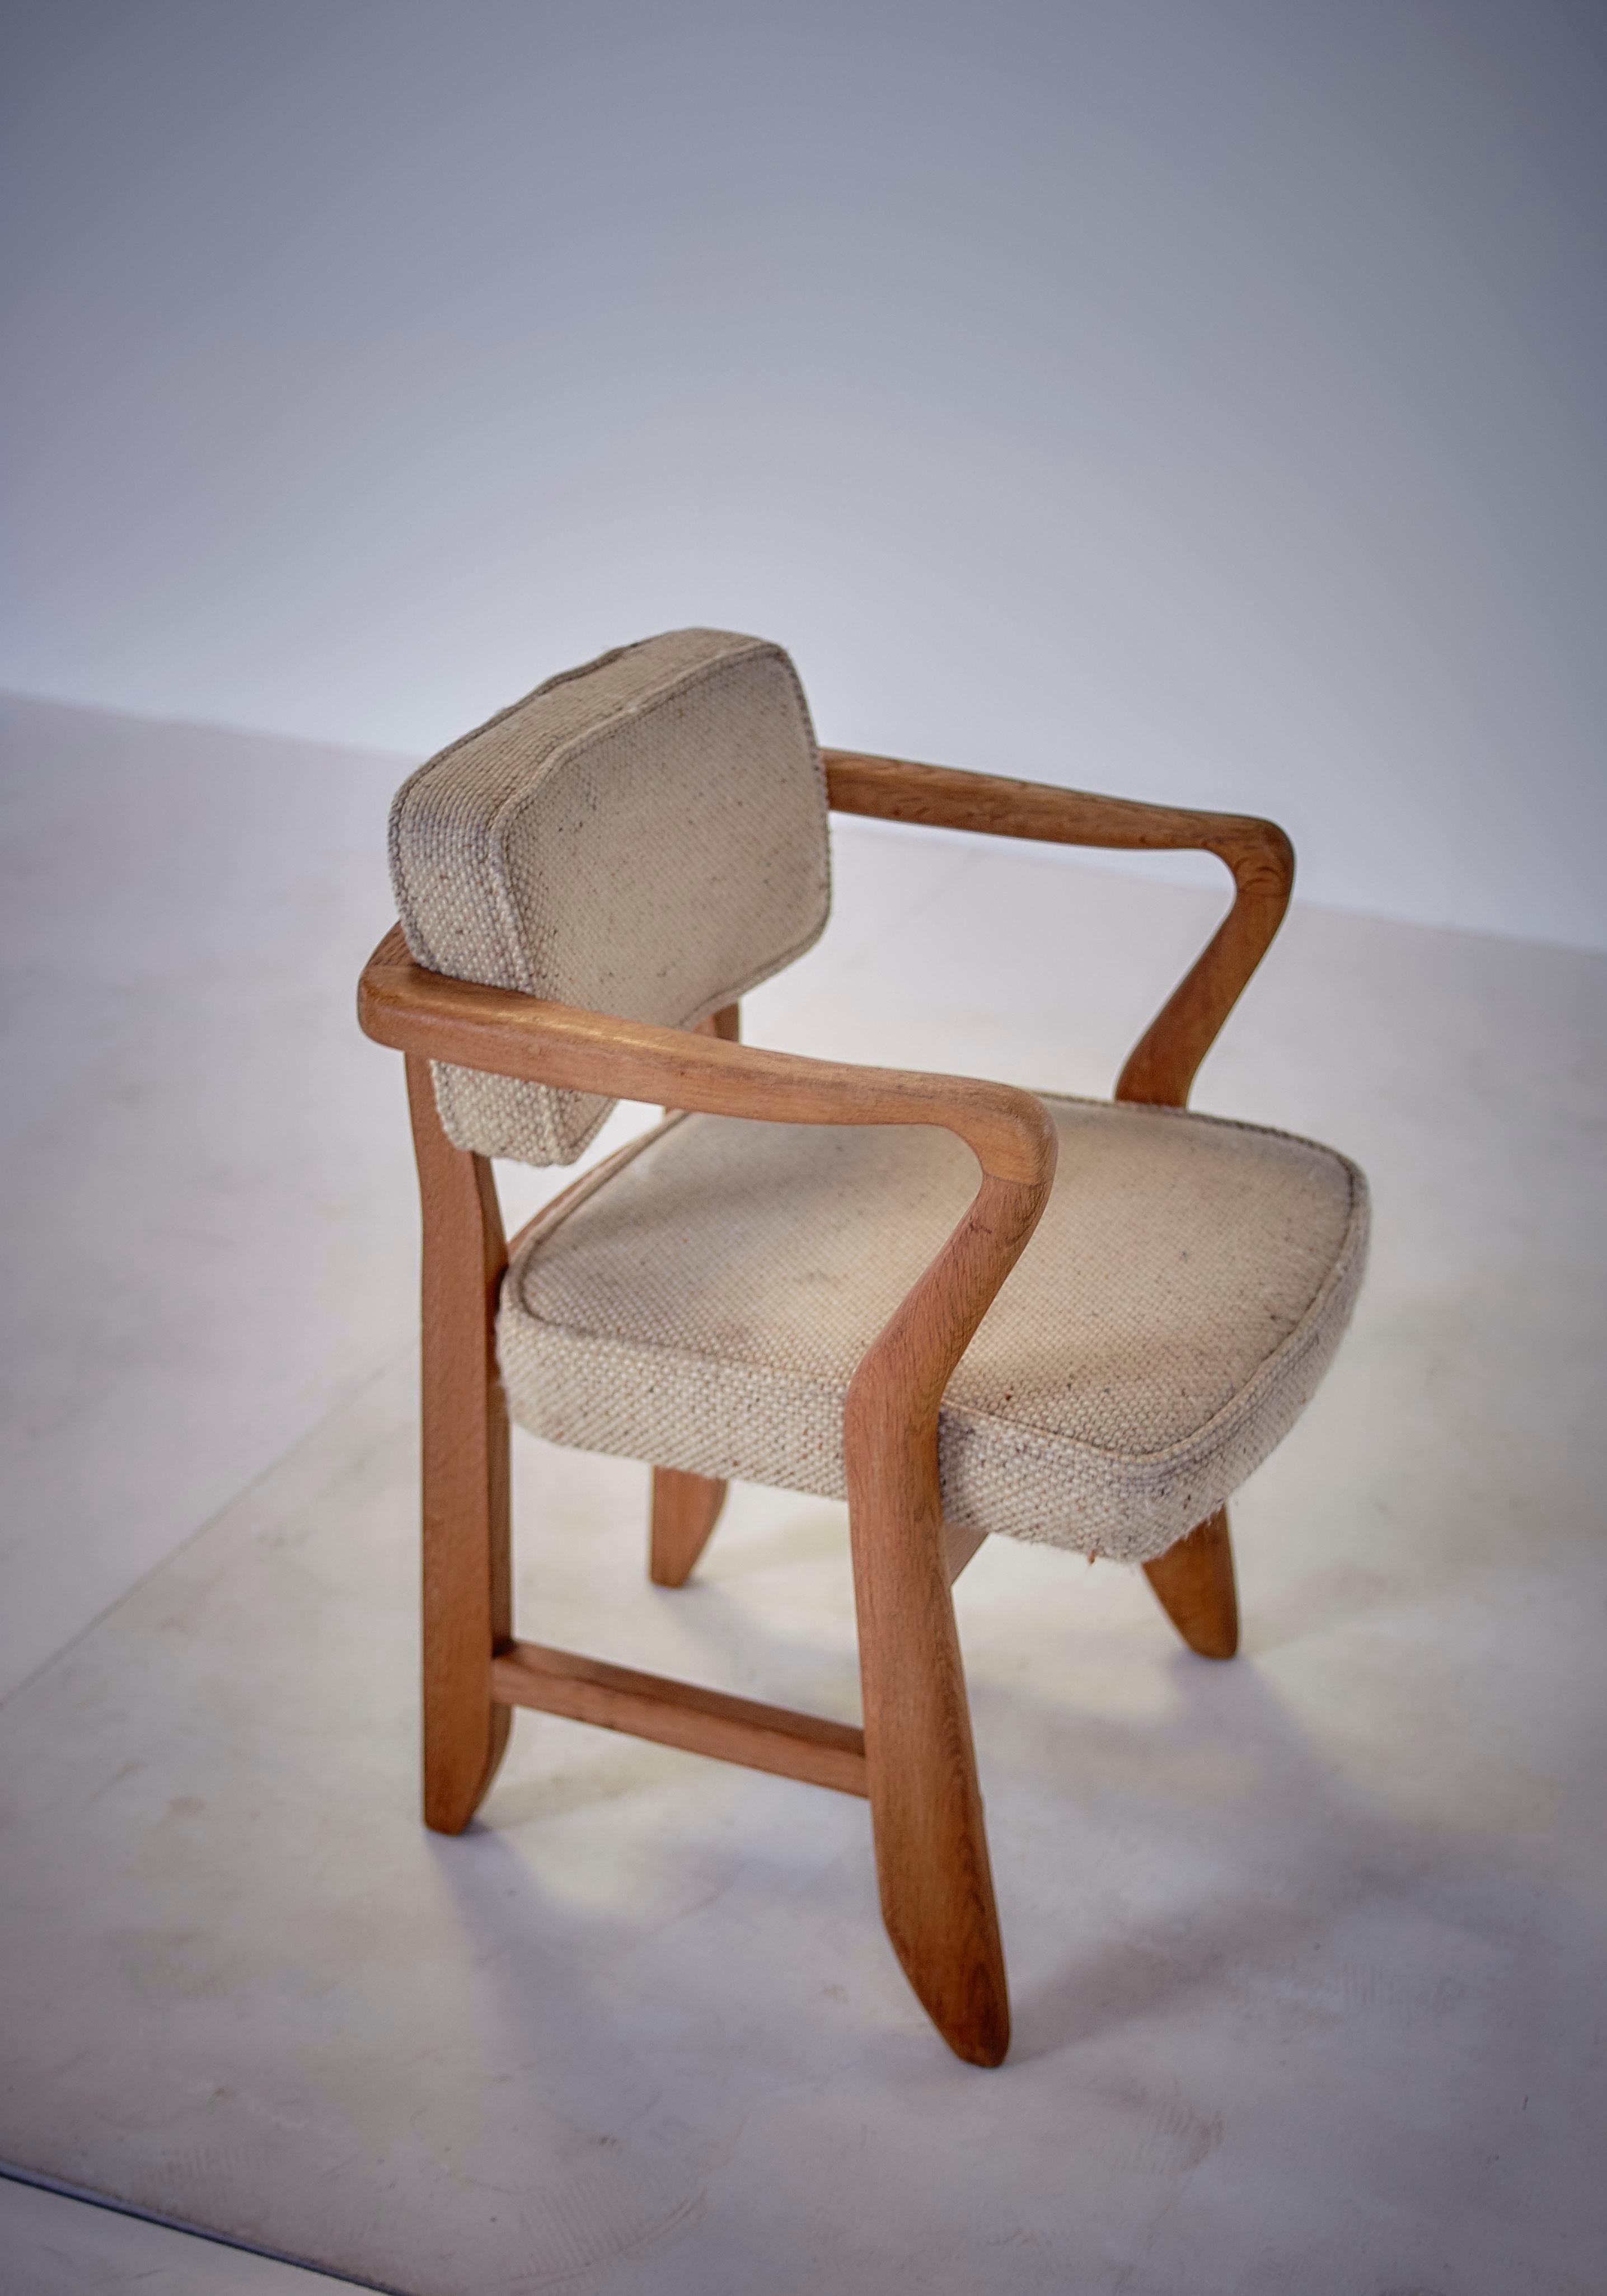 Guillerme & Chambron, Pair of Midcentury Solid Oak and Fabric French Chairs 1959 2